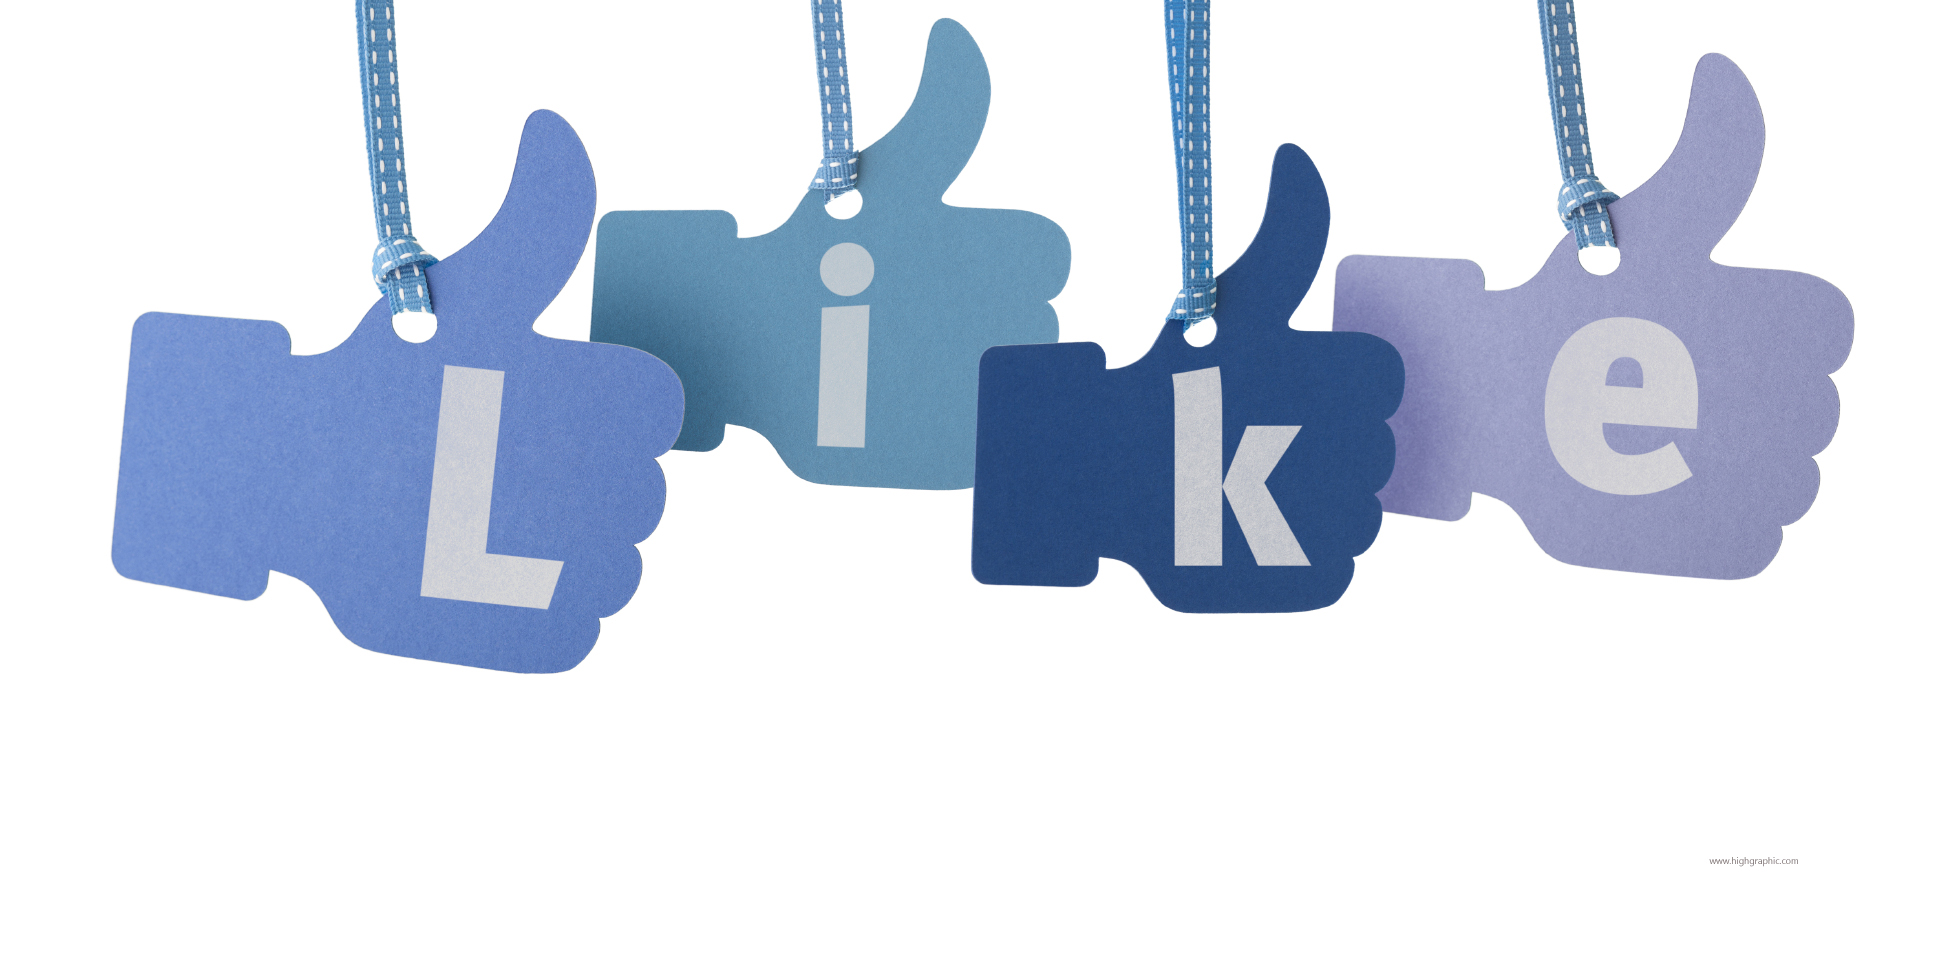 will facebook marketing work for my business?